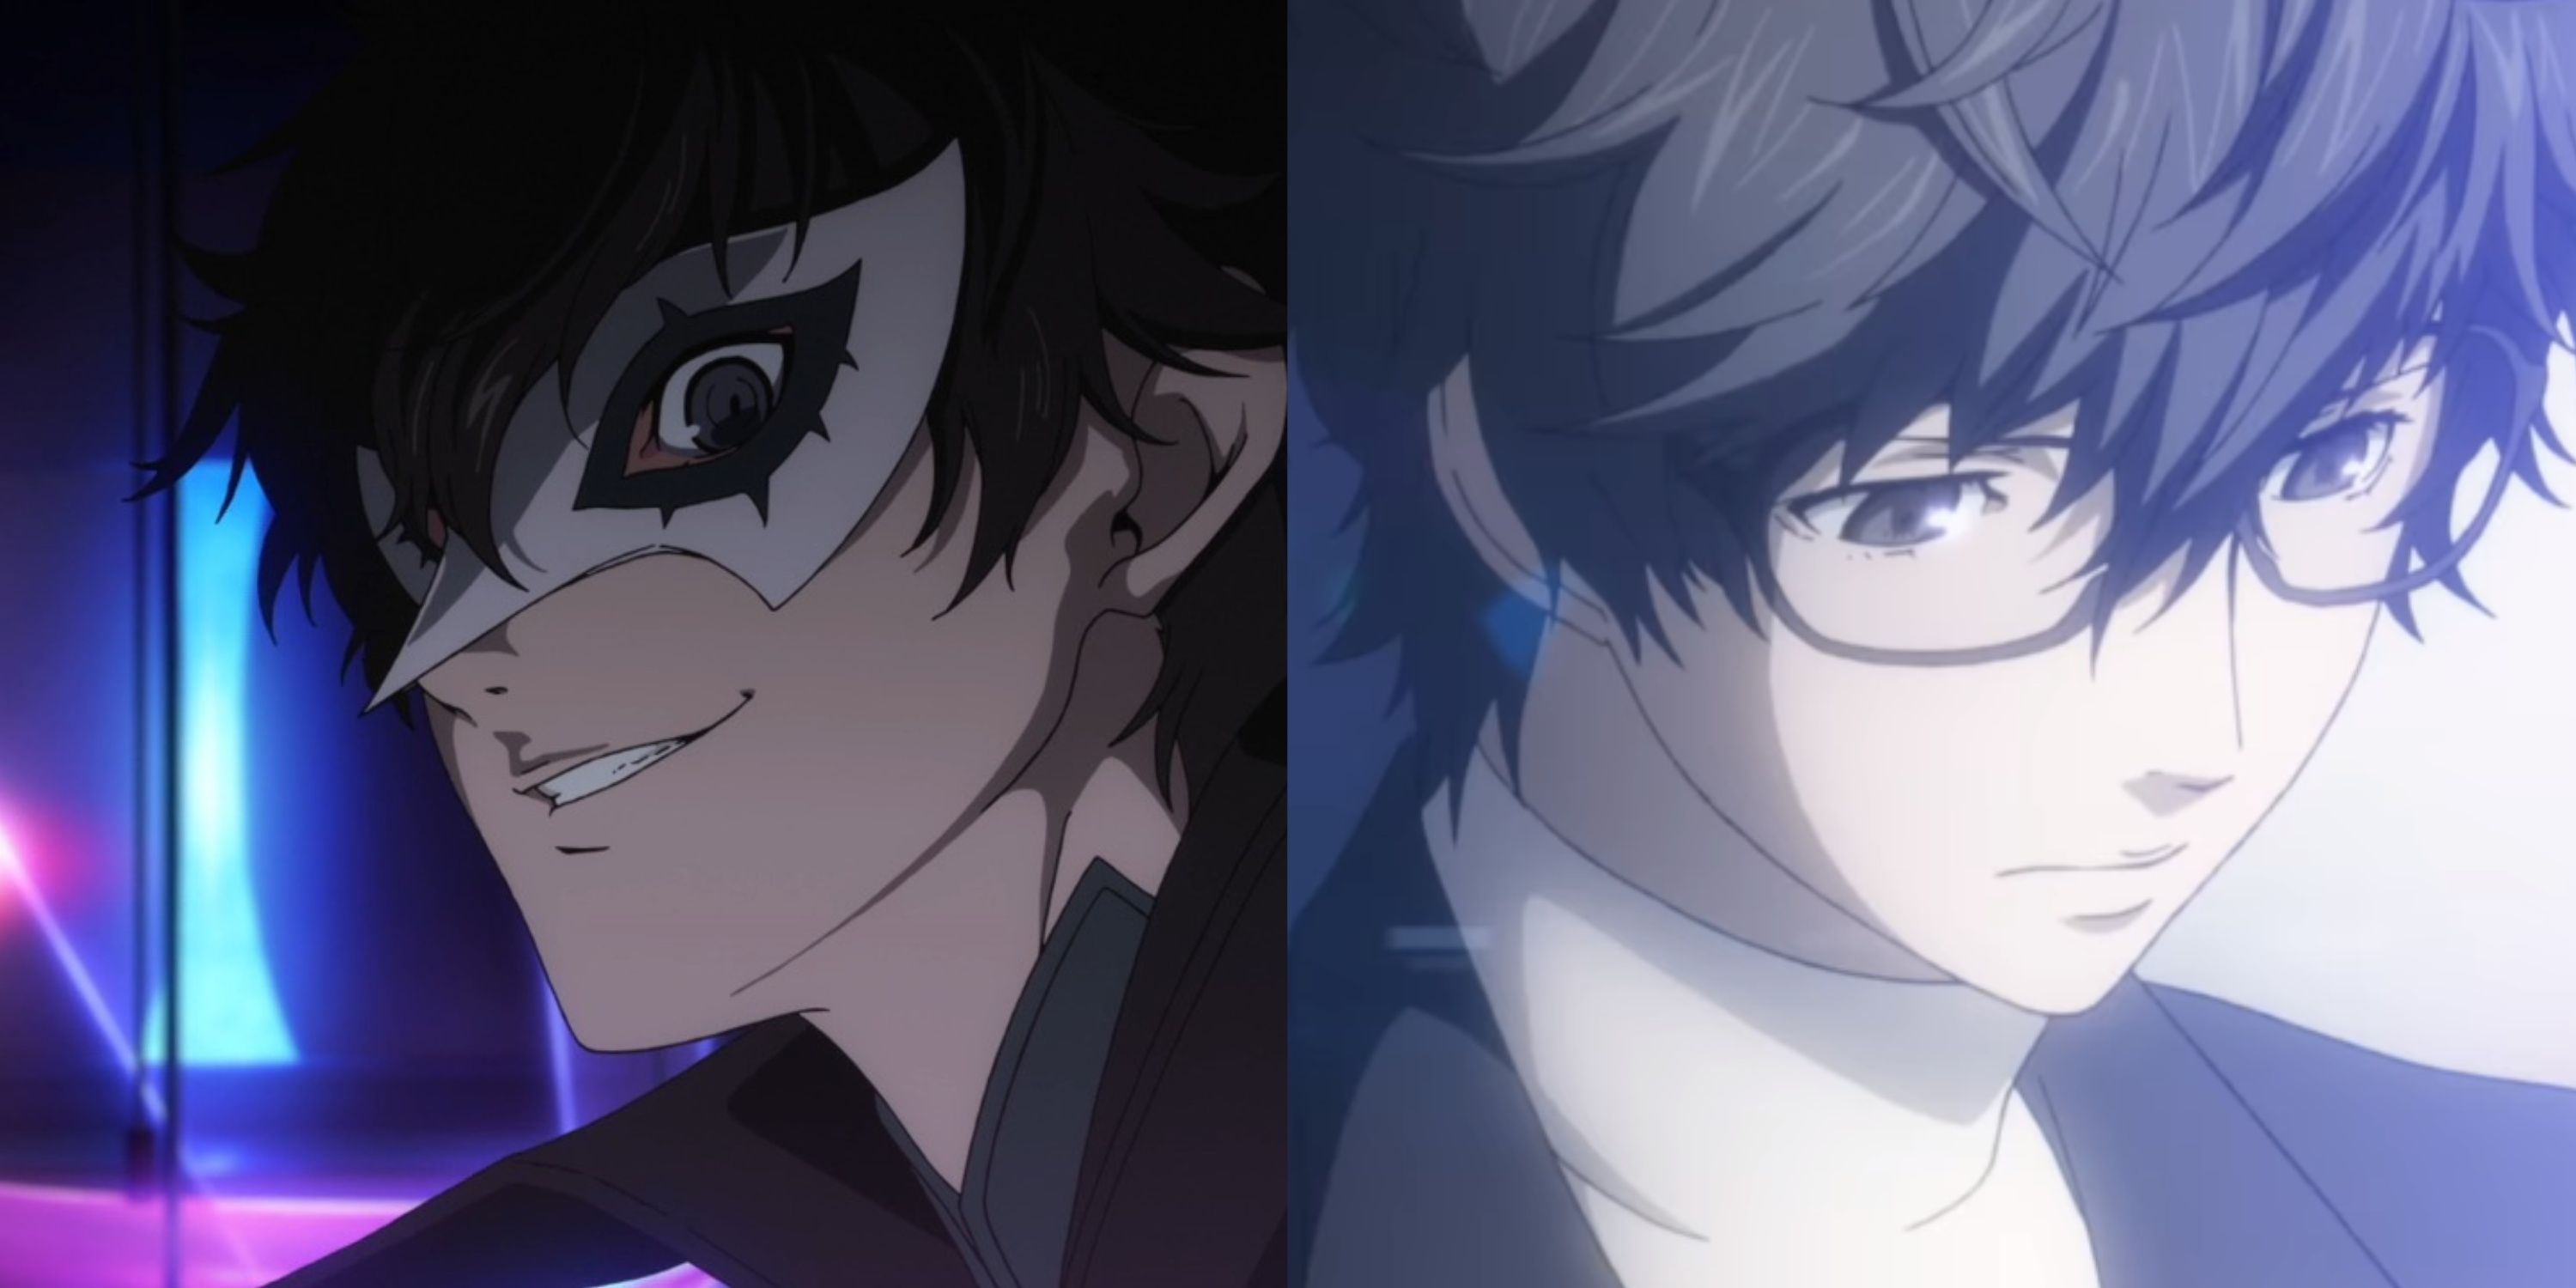 Persona 5: The Animation (Anime) - TV Tropes